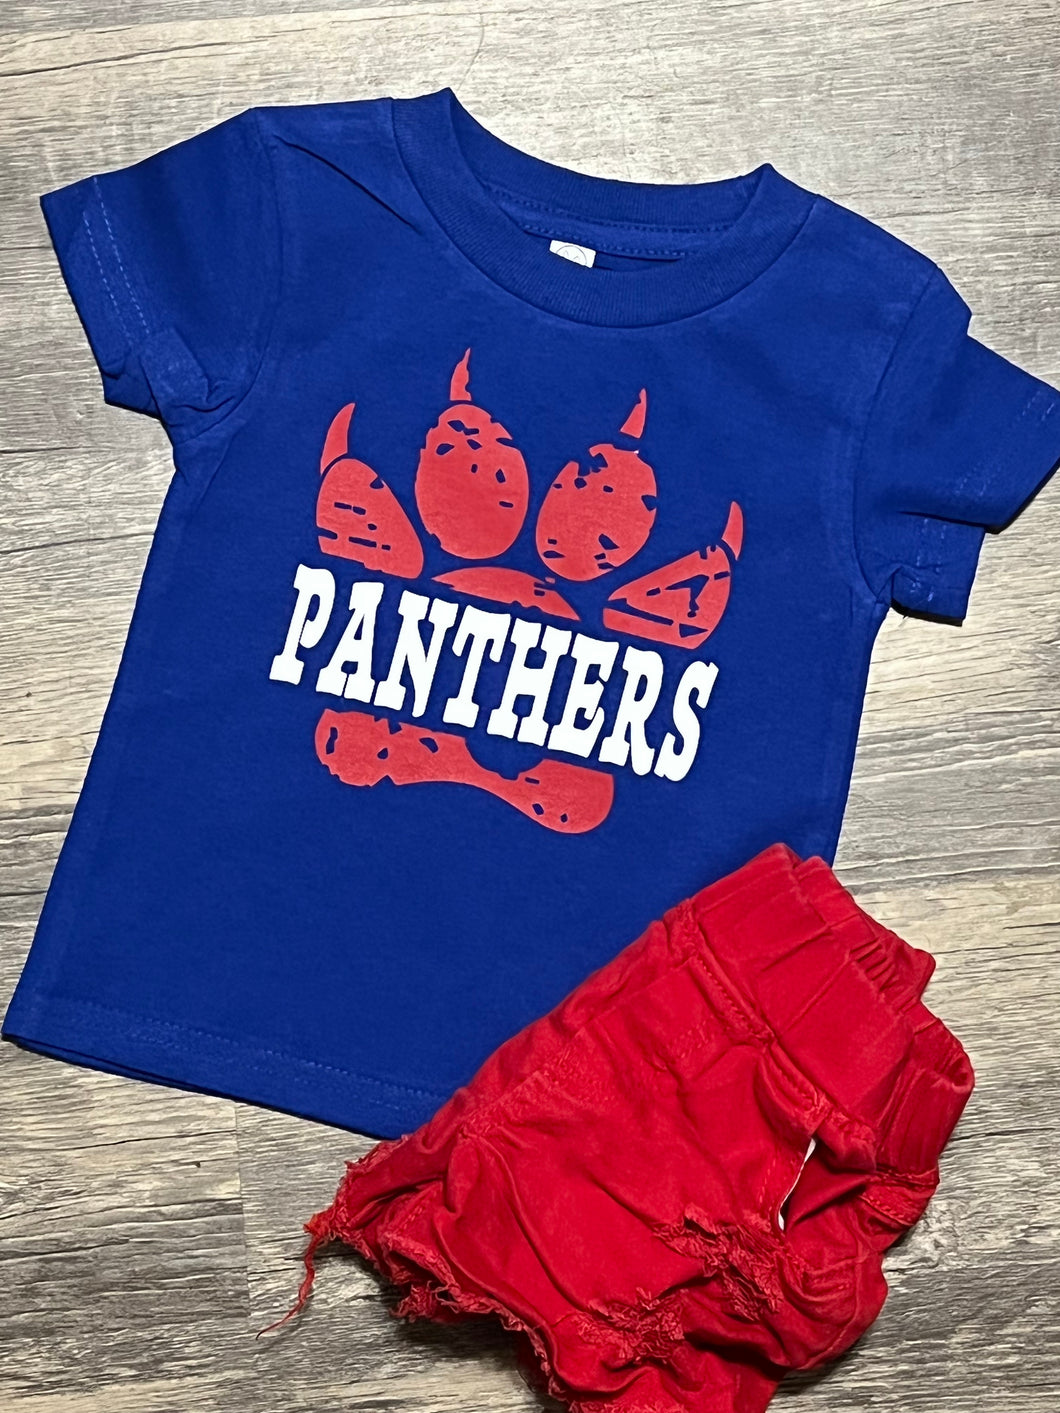 Panthers Paw Print Royal Blue kids or adult graphic tee - Mavictoria Designs Hot Press Express